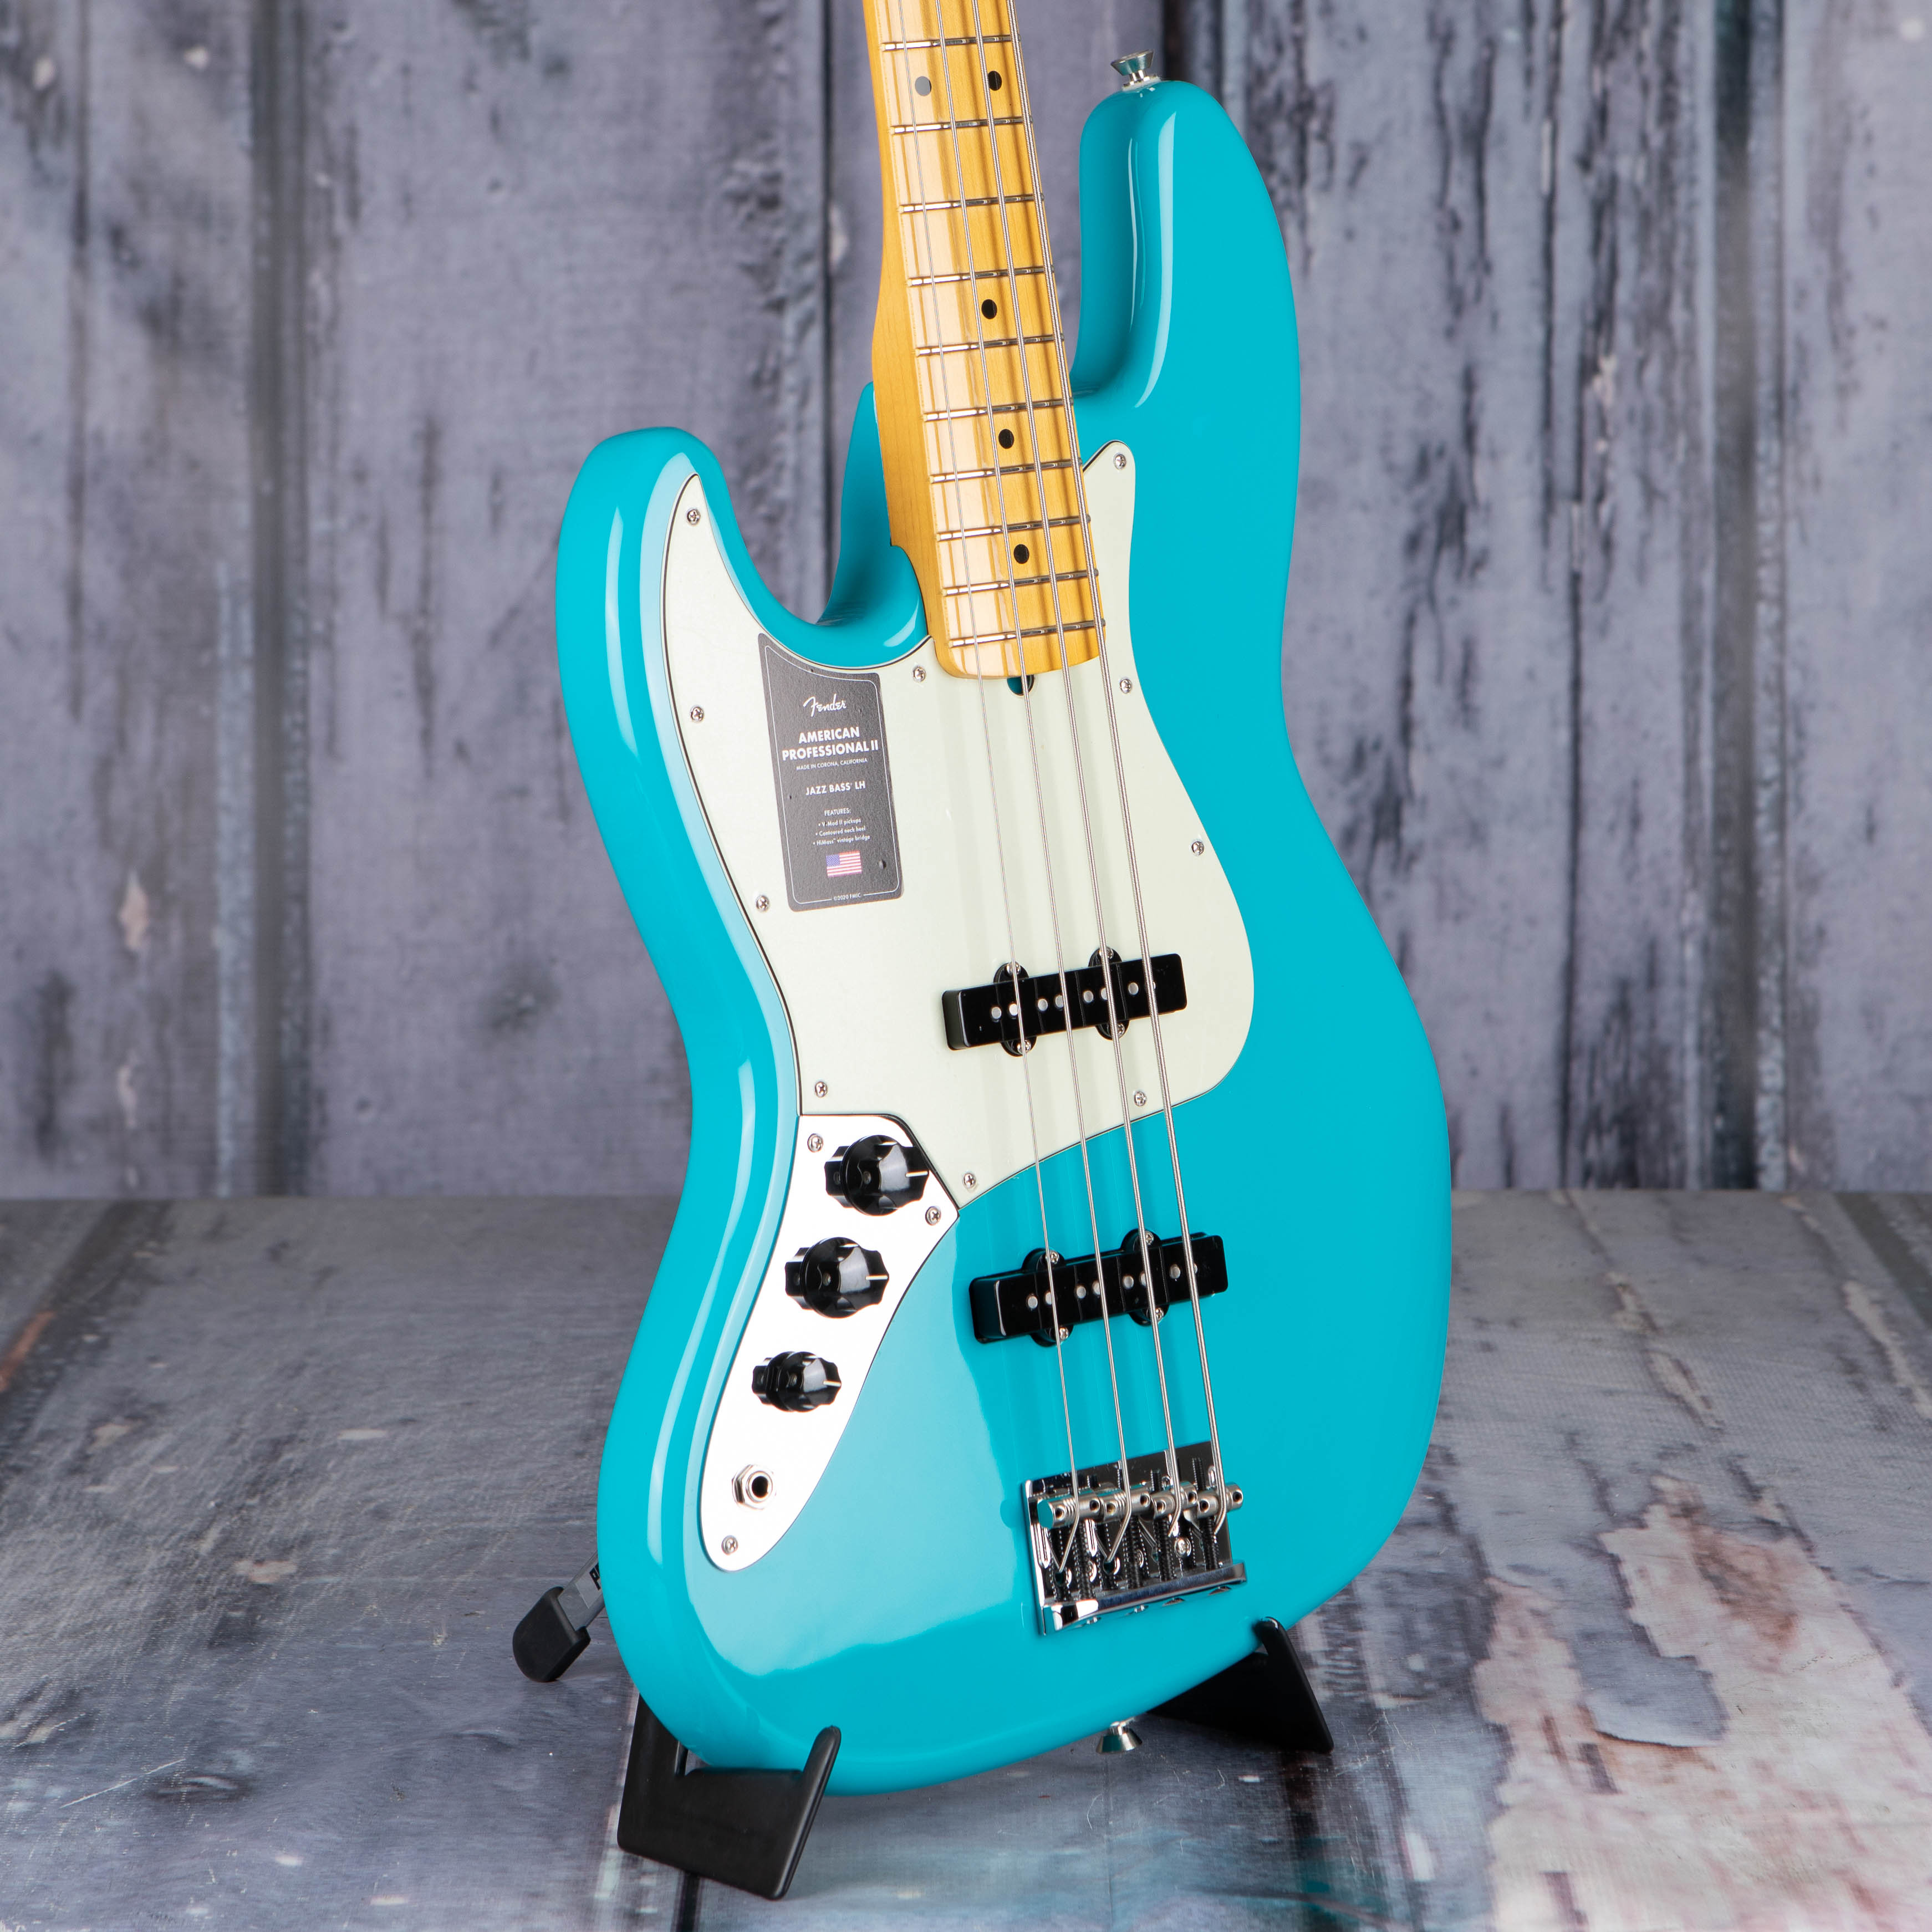 Fender American Professional II Jazz Bass Left-Handed Guitar, Miami Blue, angle